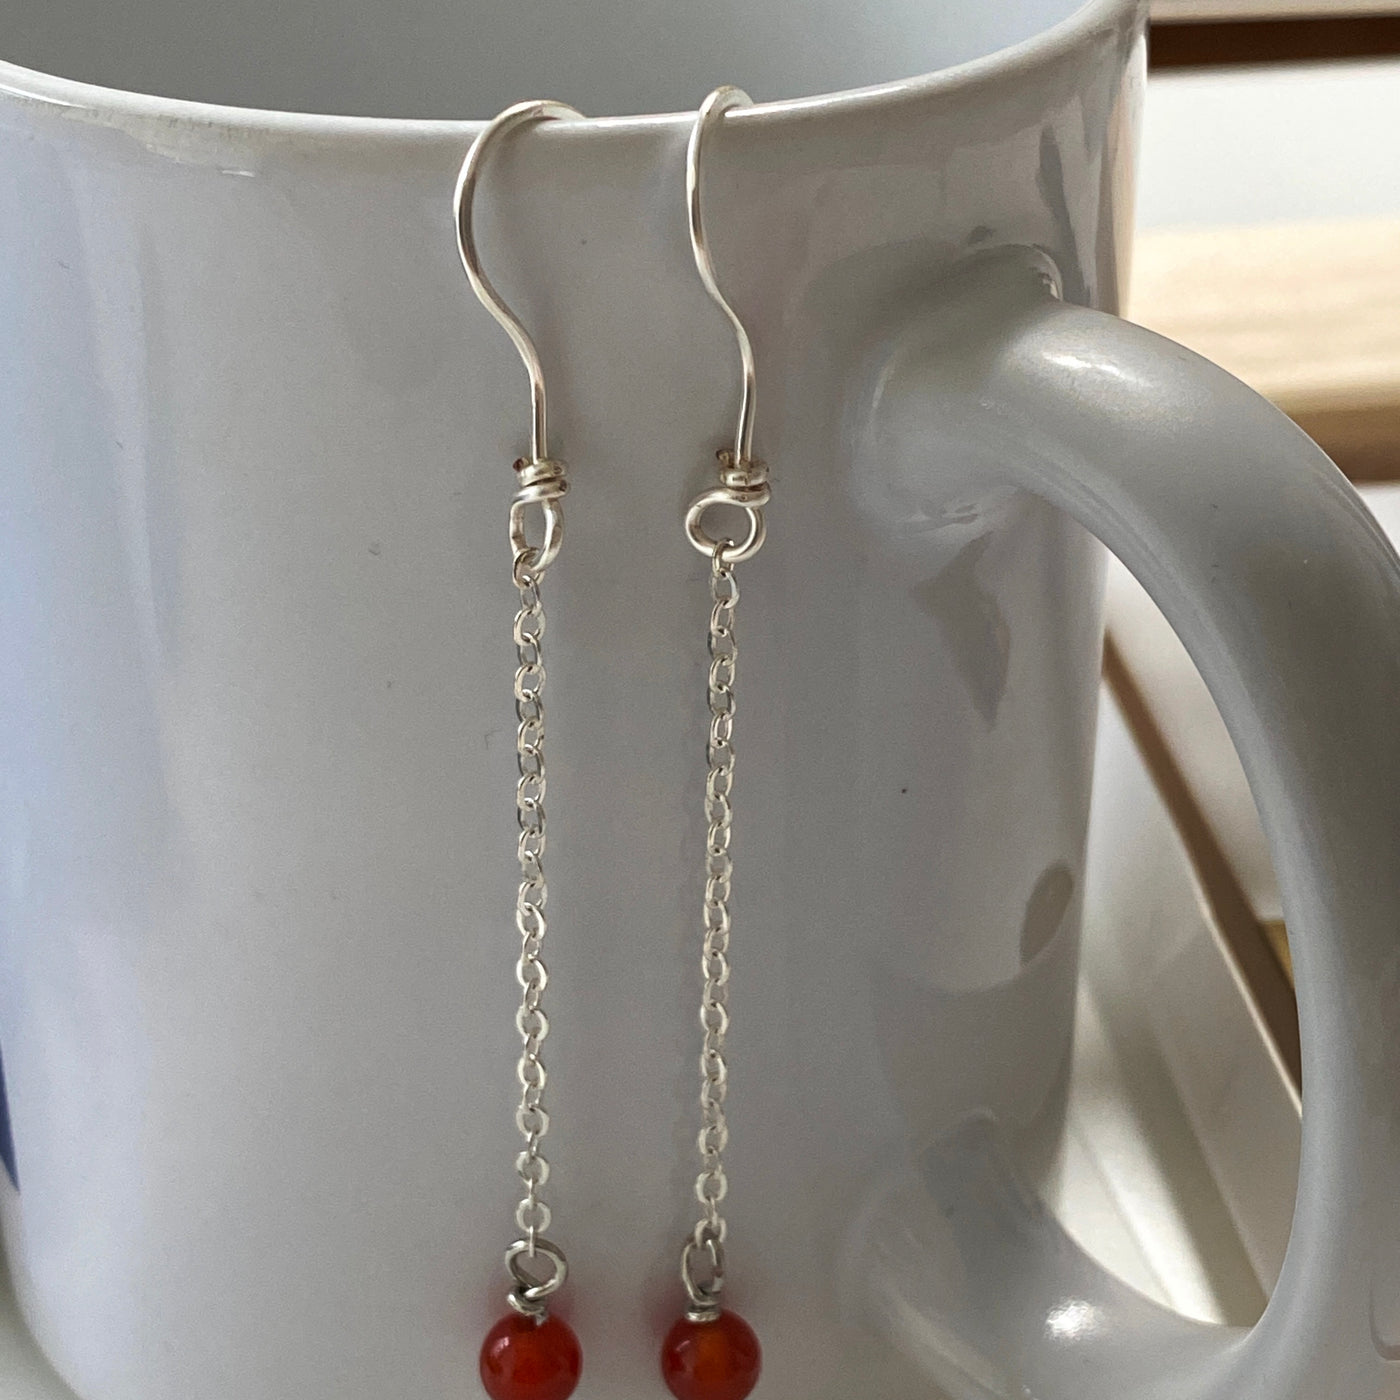 Silver chain and red agate earrings